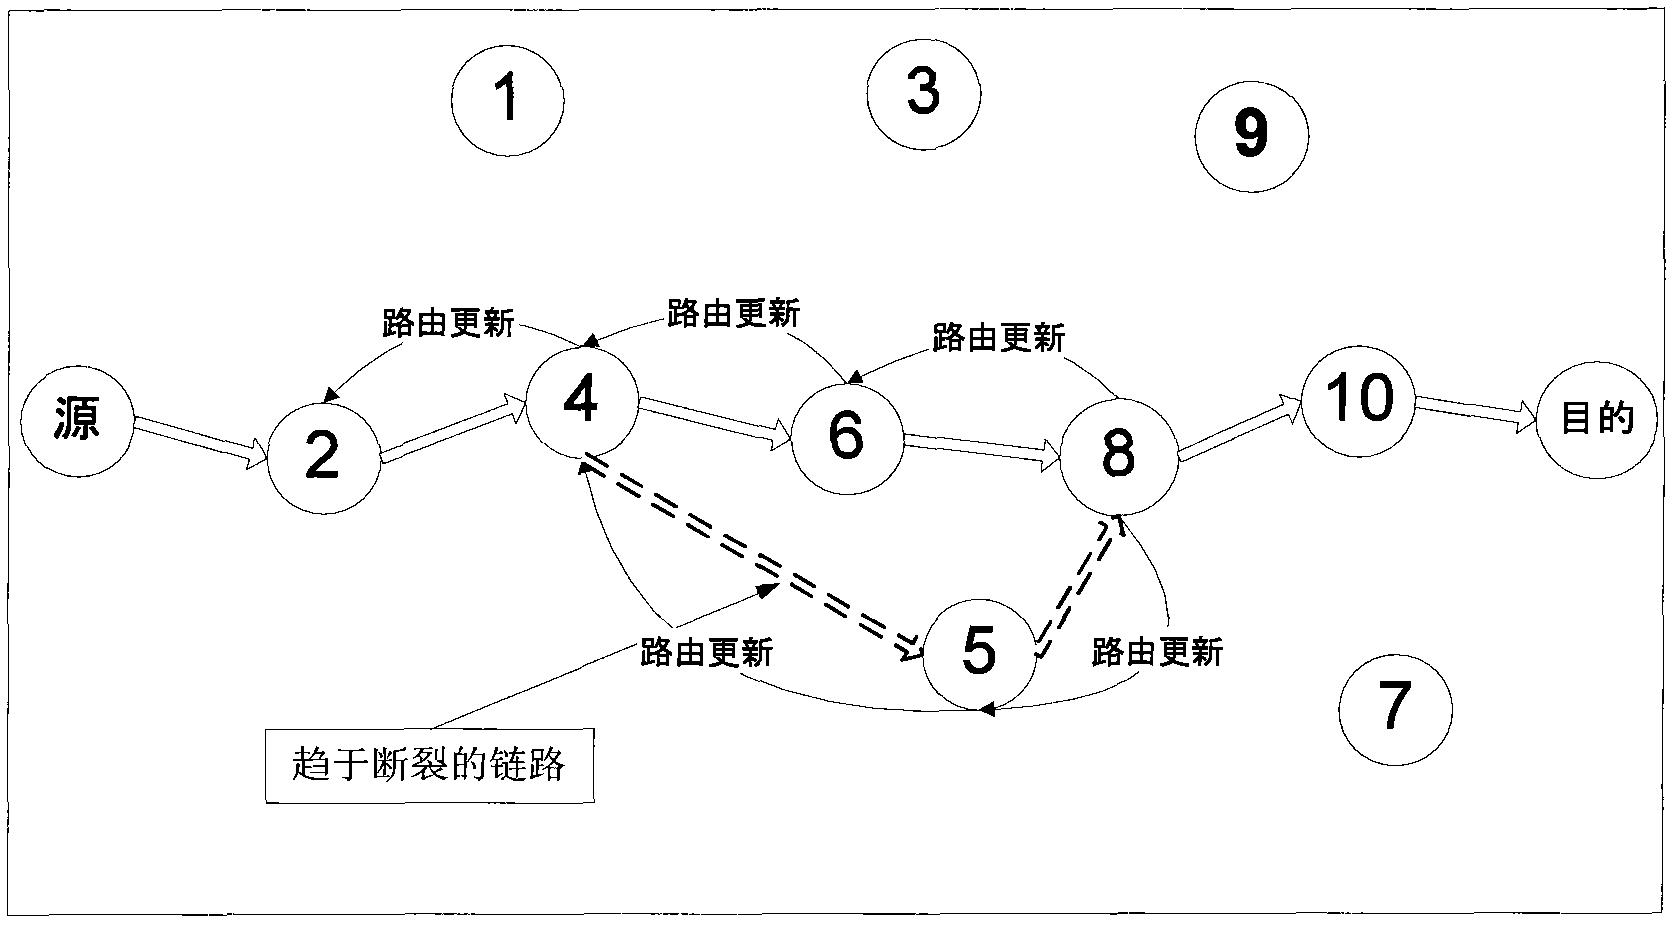 Locking route method used for wireless multi-hop network